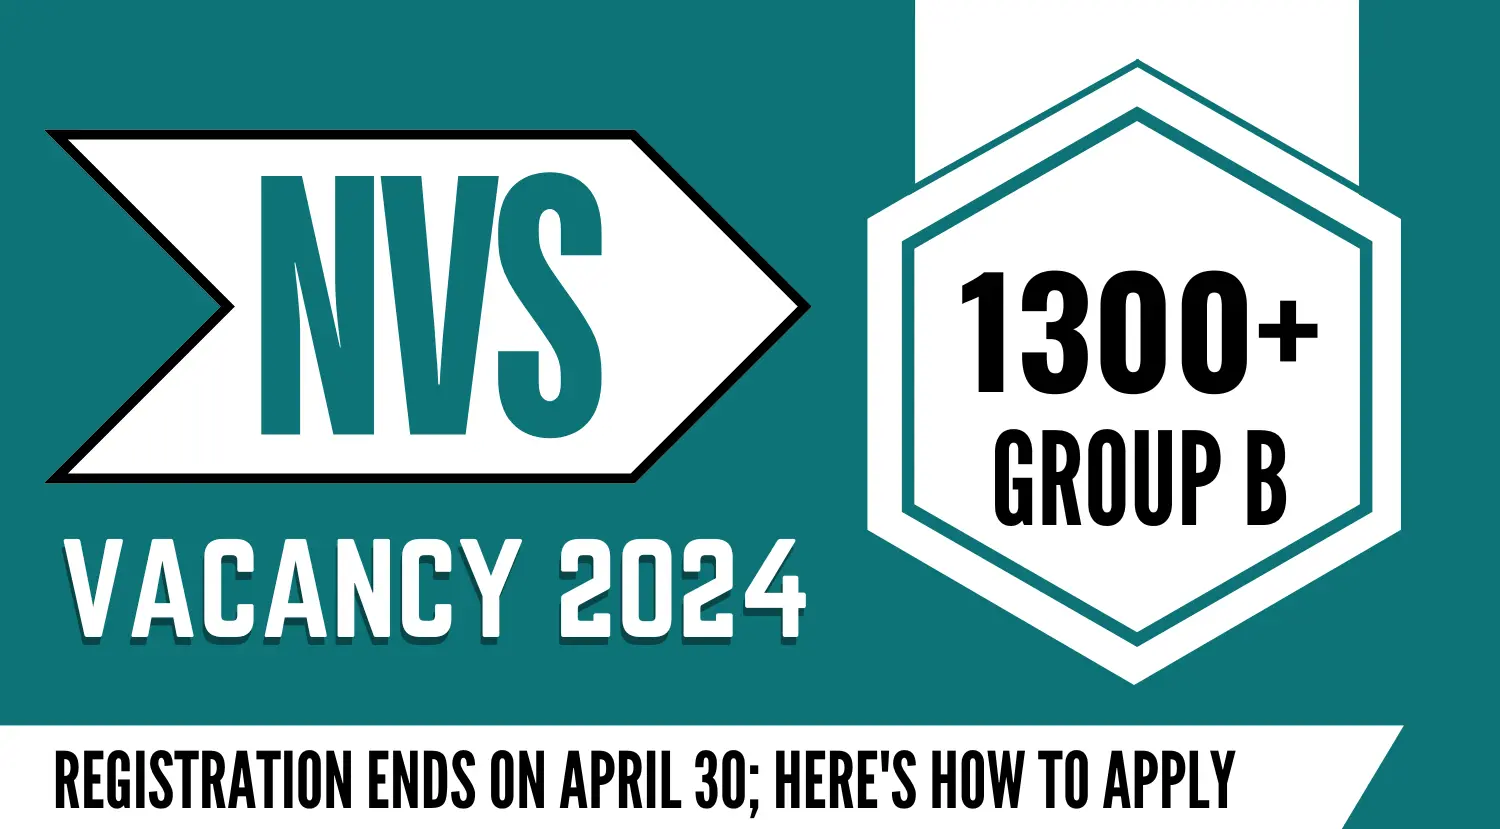 NVS 1300 Group B Vacancy 2024 Registration Ends on April 30 Heres How to Apply